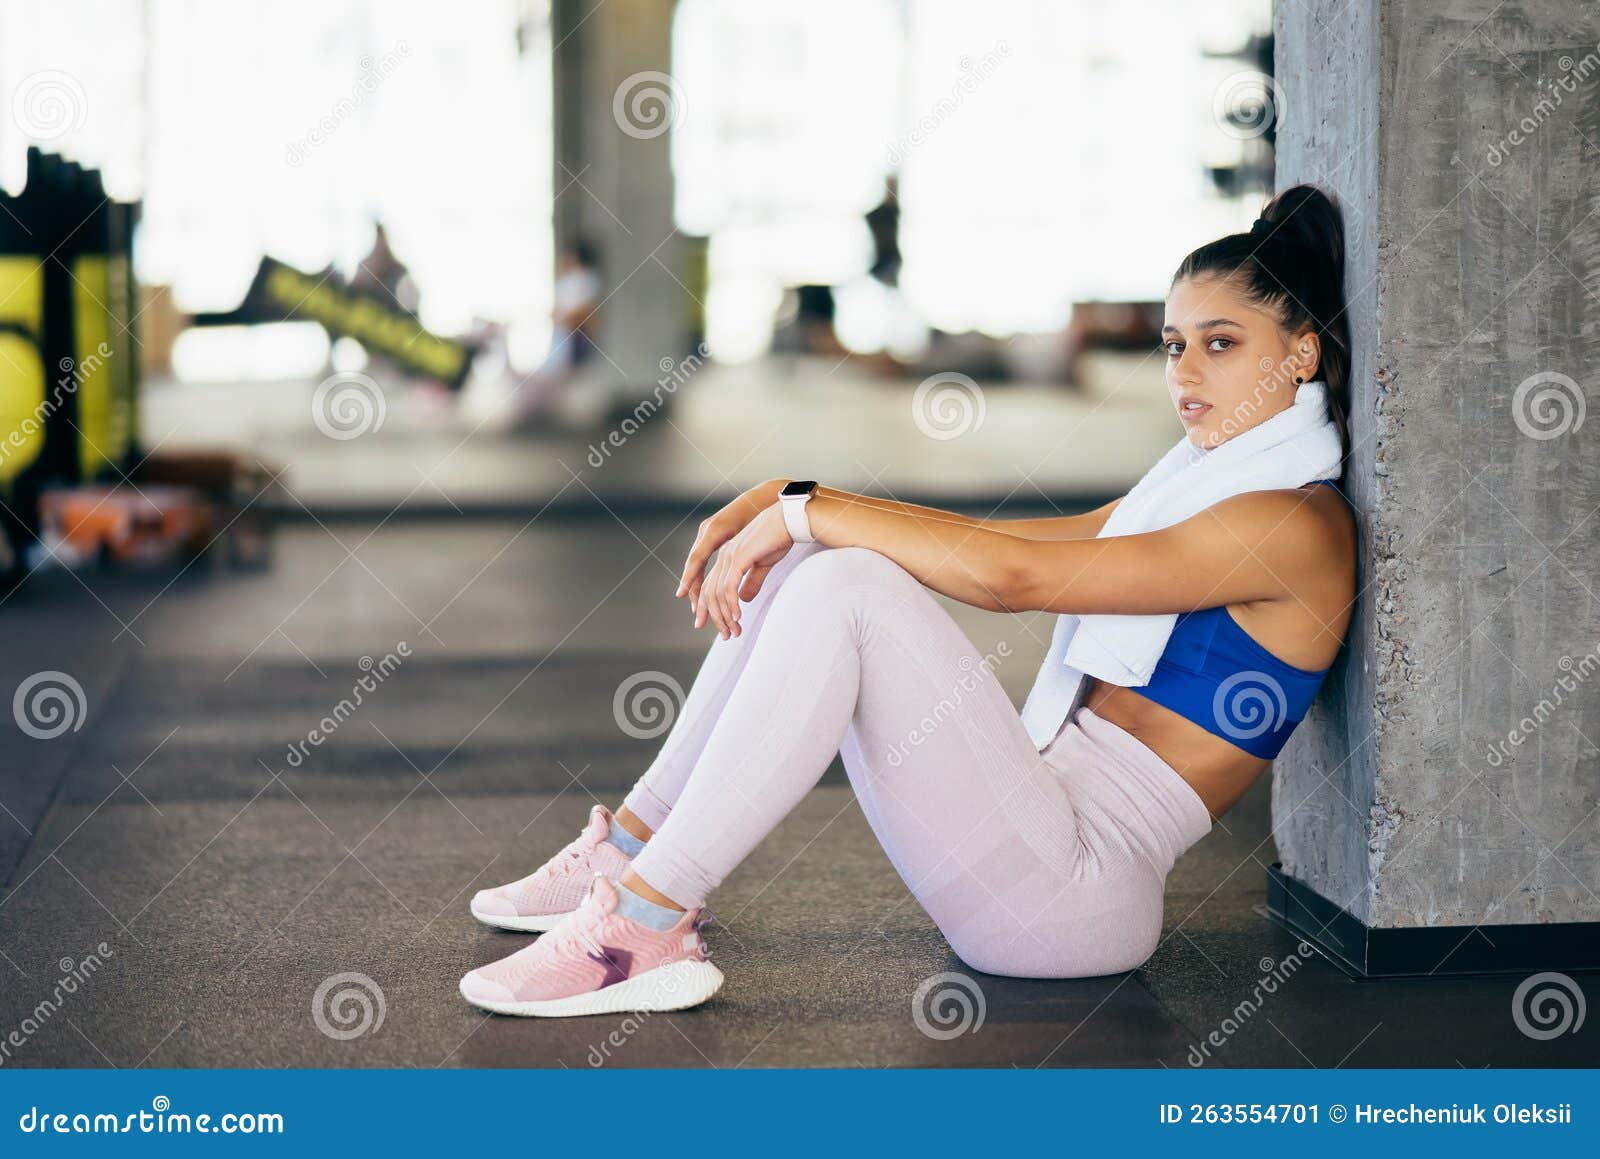 Healthy Young Female Sitting Relaxed after Training in Gym. Stock Image ...